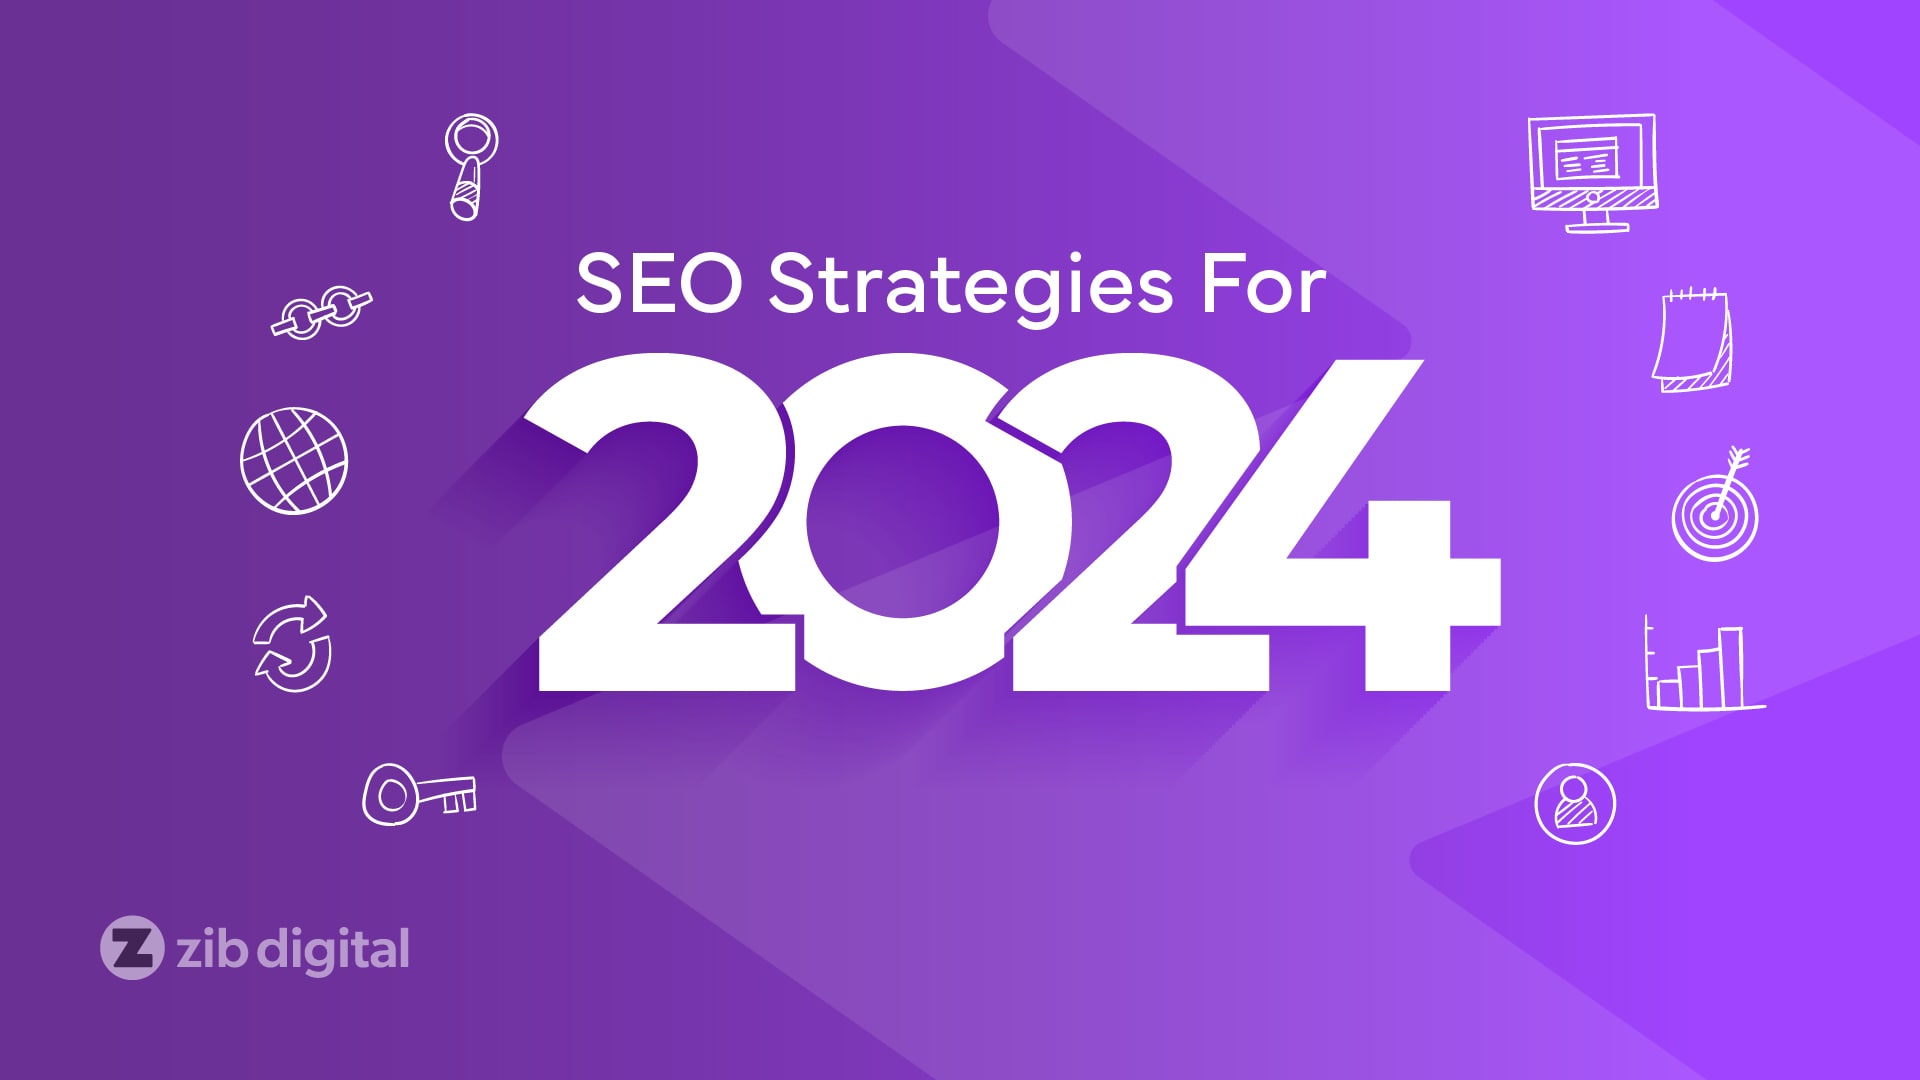 Seo strategies for 2024: how to use them for future success